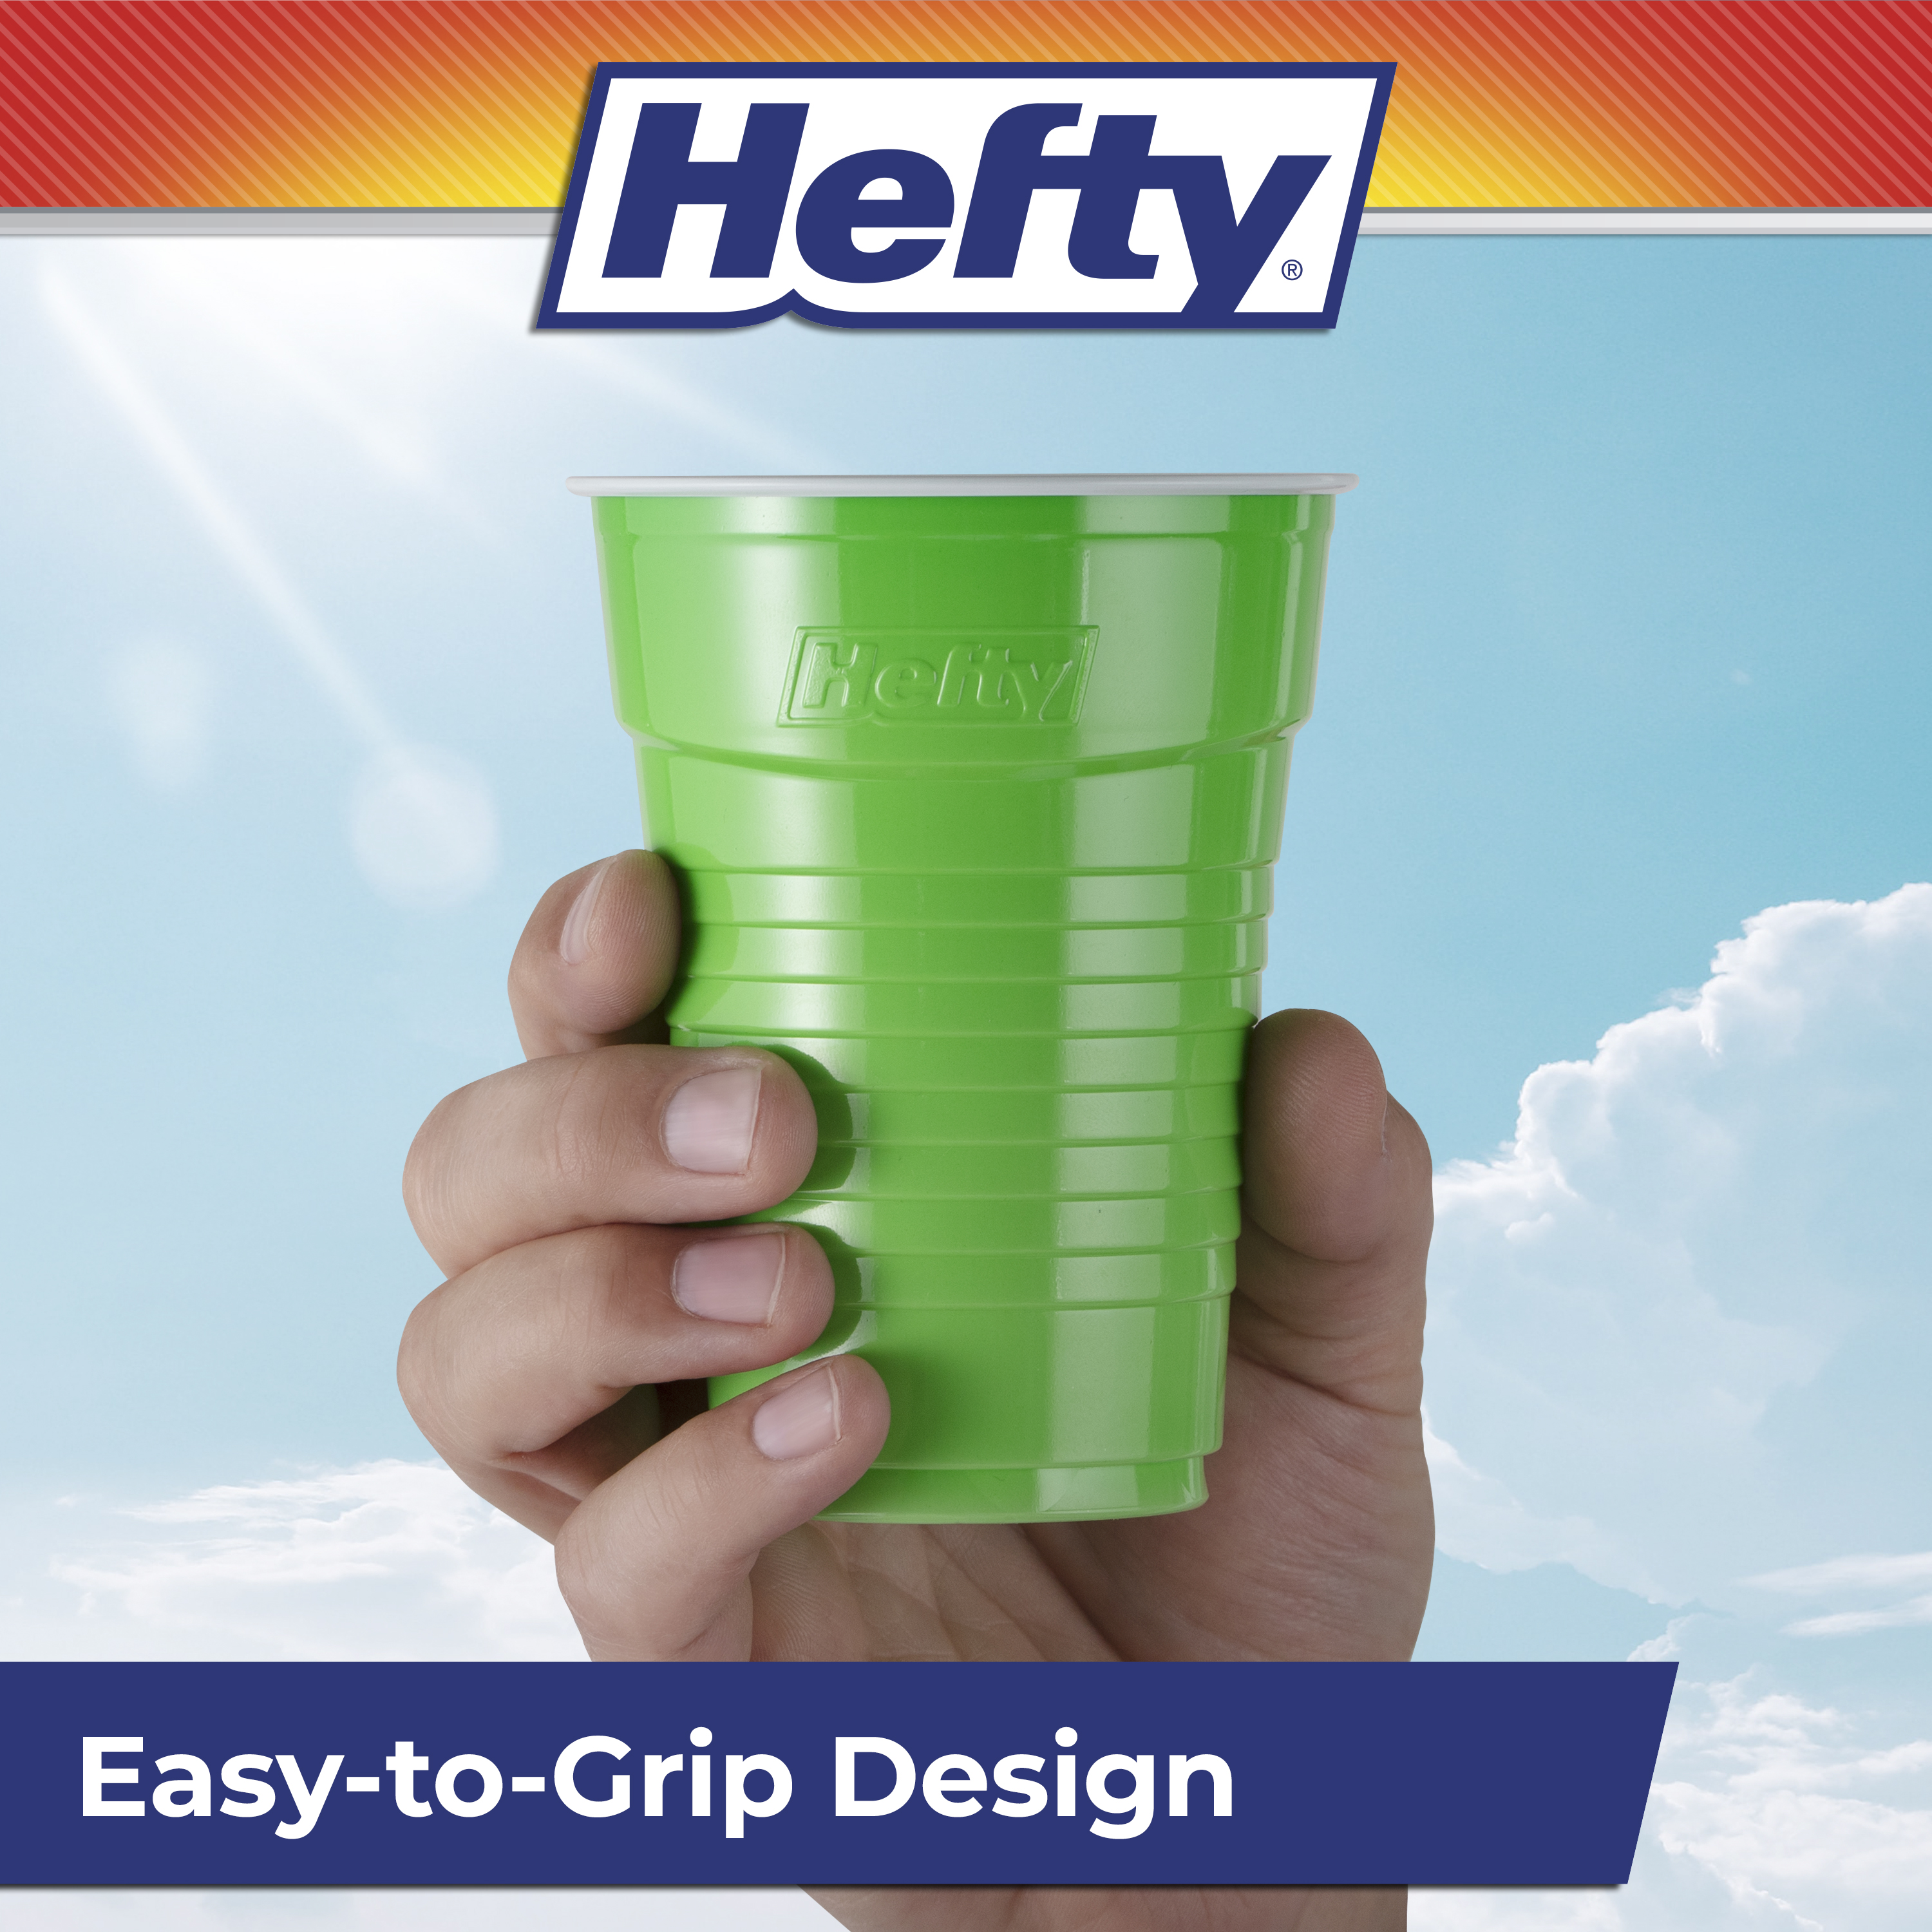 Hefty Everyday Disposable Plastic Cups, Assorted Colors, 16 oz, 100 count - image 5 of 8